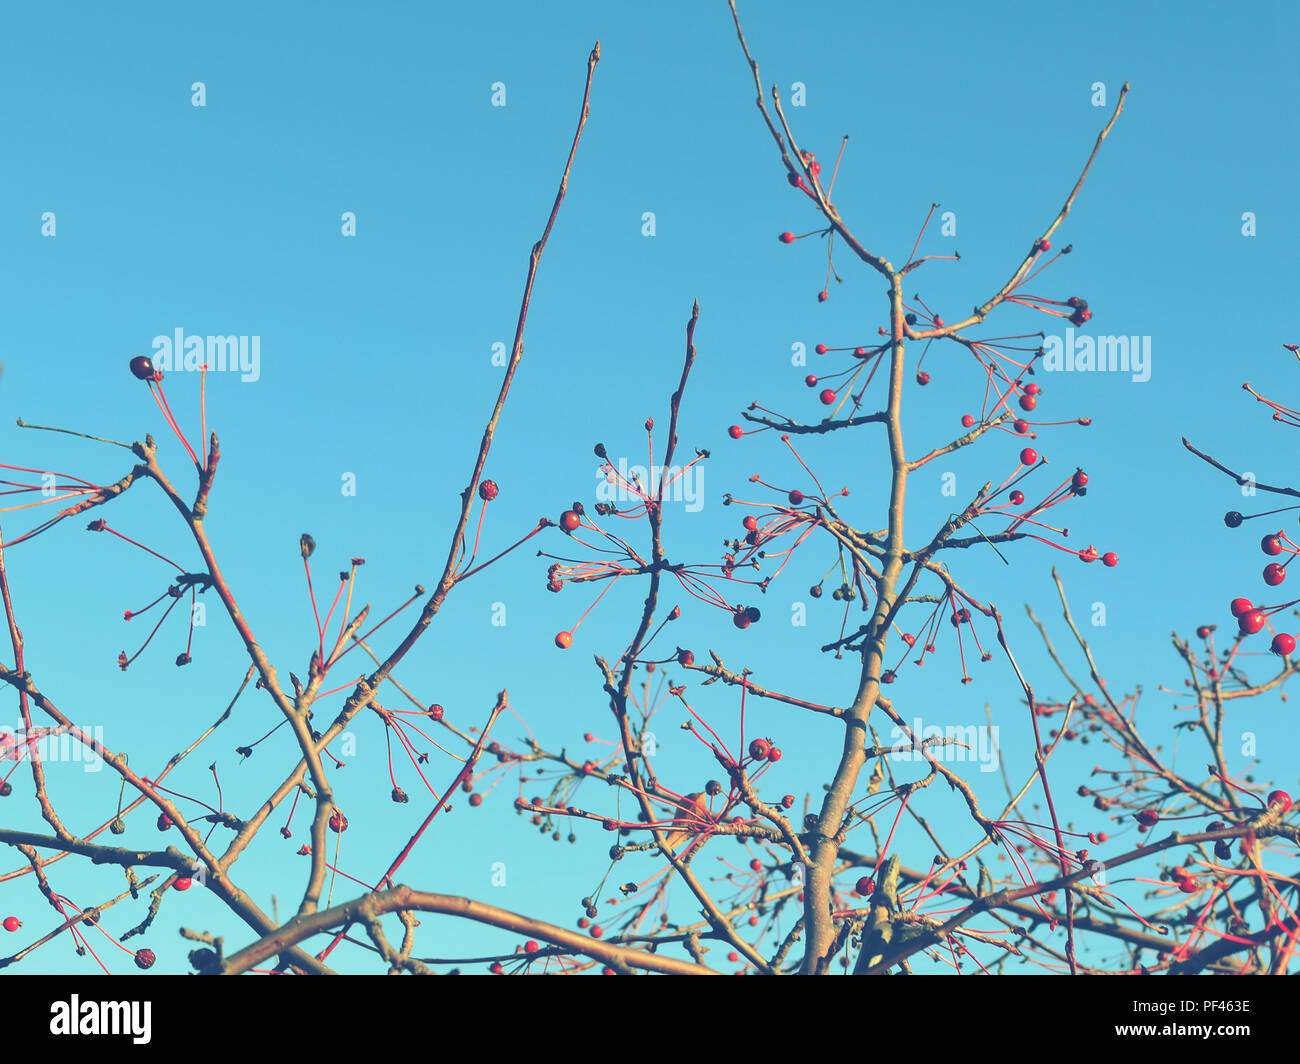 Red berries on the fluttering branches of trees against the blue sky. Stock Photo